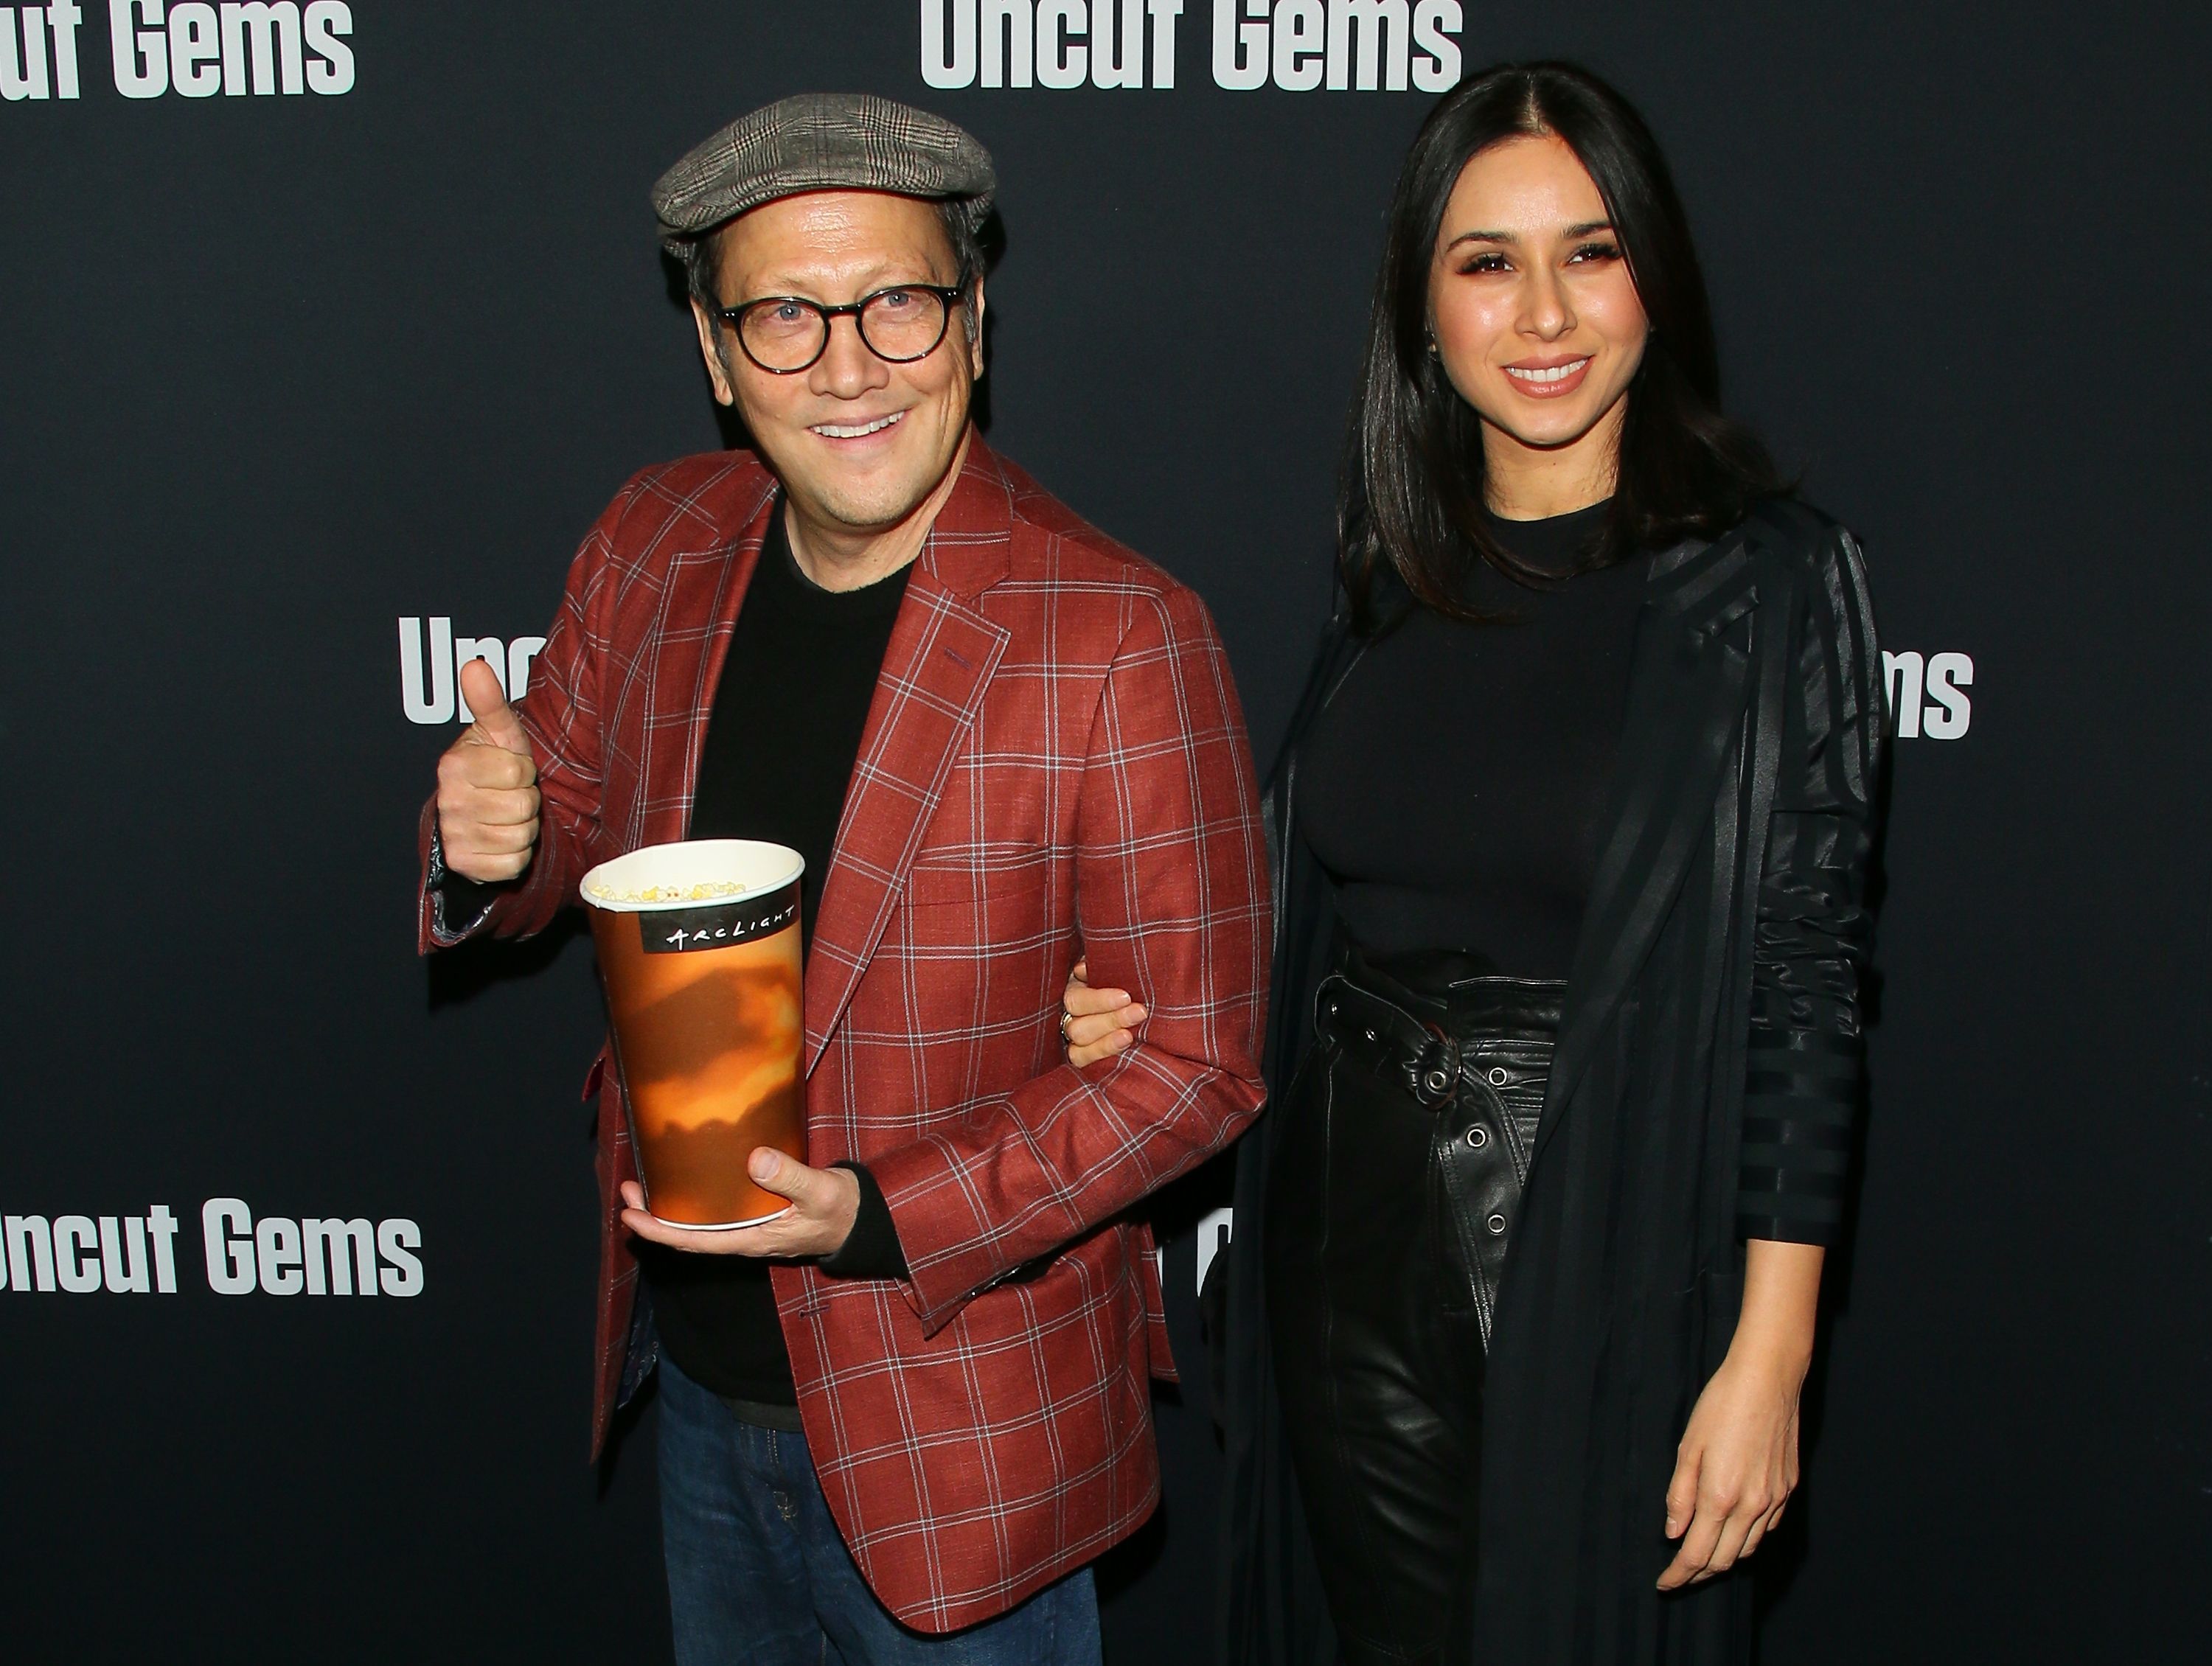 Rob Schneider and Patricia Azarcoya Schneider during the premiere of A24's "Uncut Gems" at The Dome at Arclight Hollywood on December 11, 2019 in Hollywood, California. | Source: Getty Images